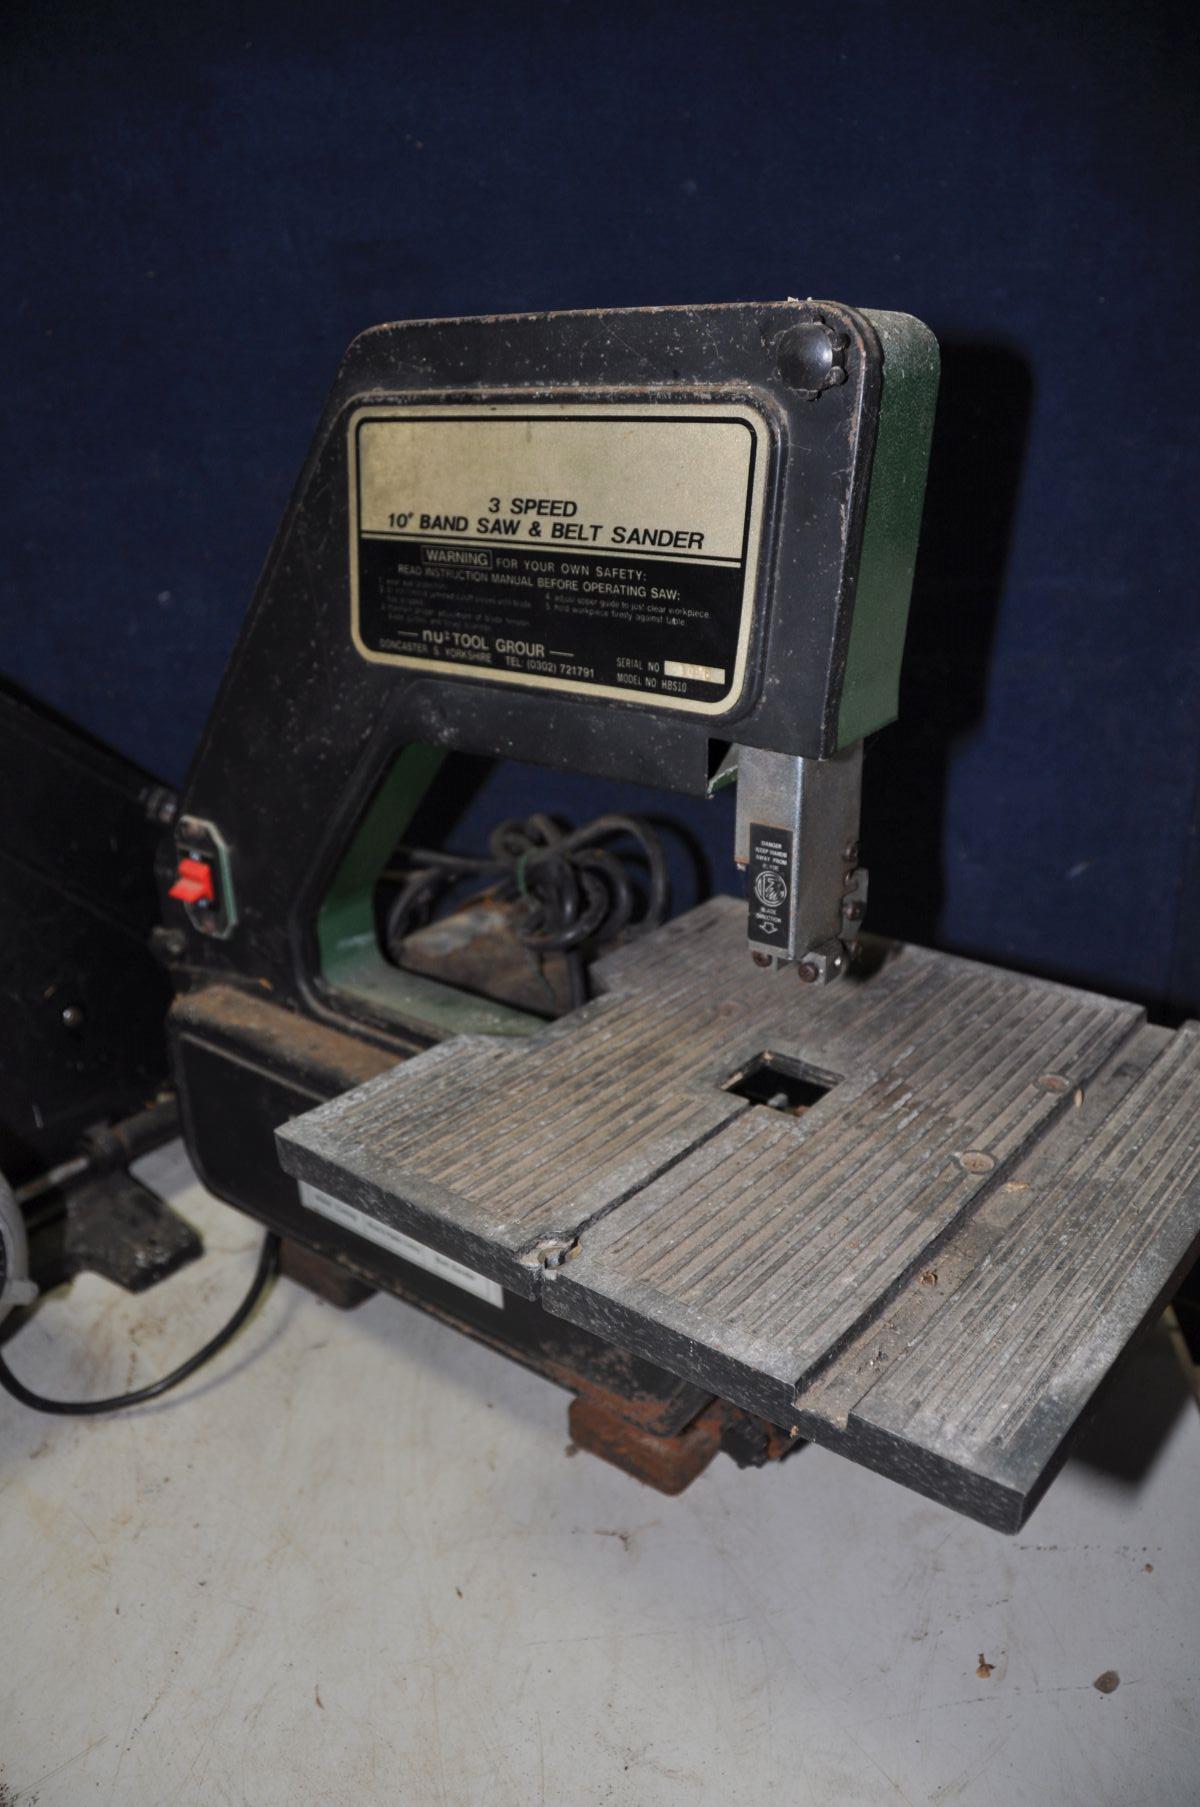 A BLACK AND DECKER BD-339 band saw along with a NU-TOOL GROUR HBS10 three speed band saw/belt sander - Bild 2 aus 3